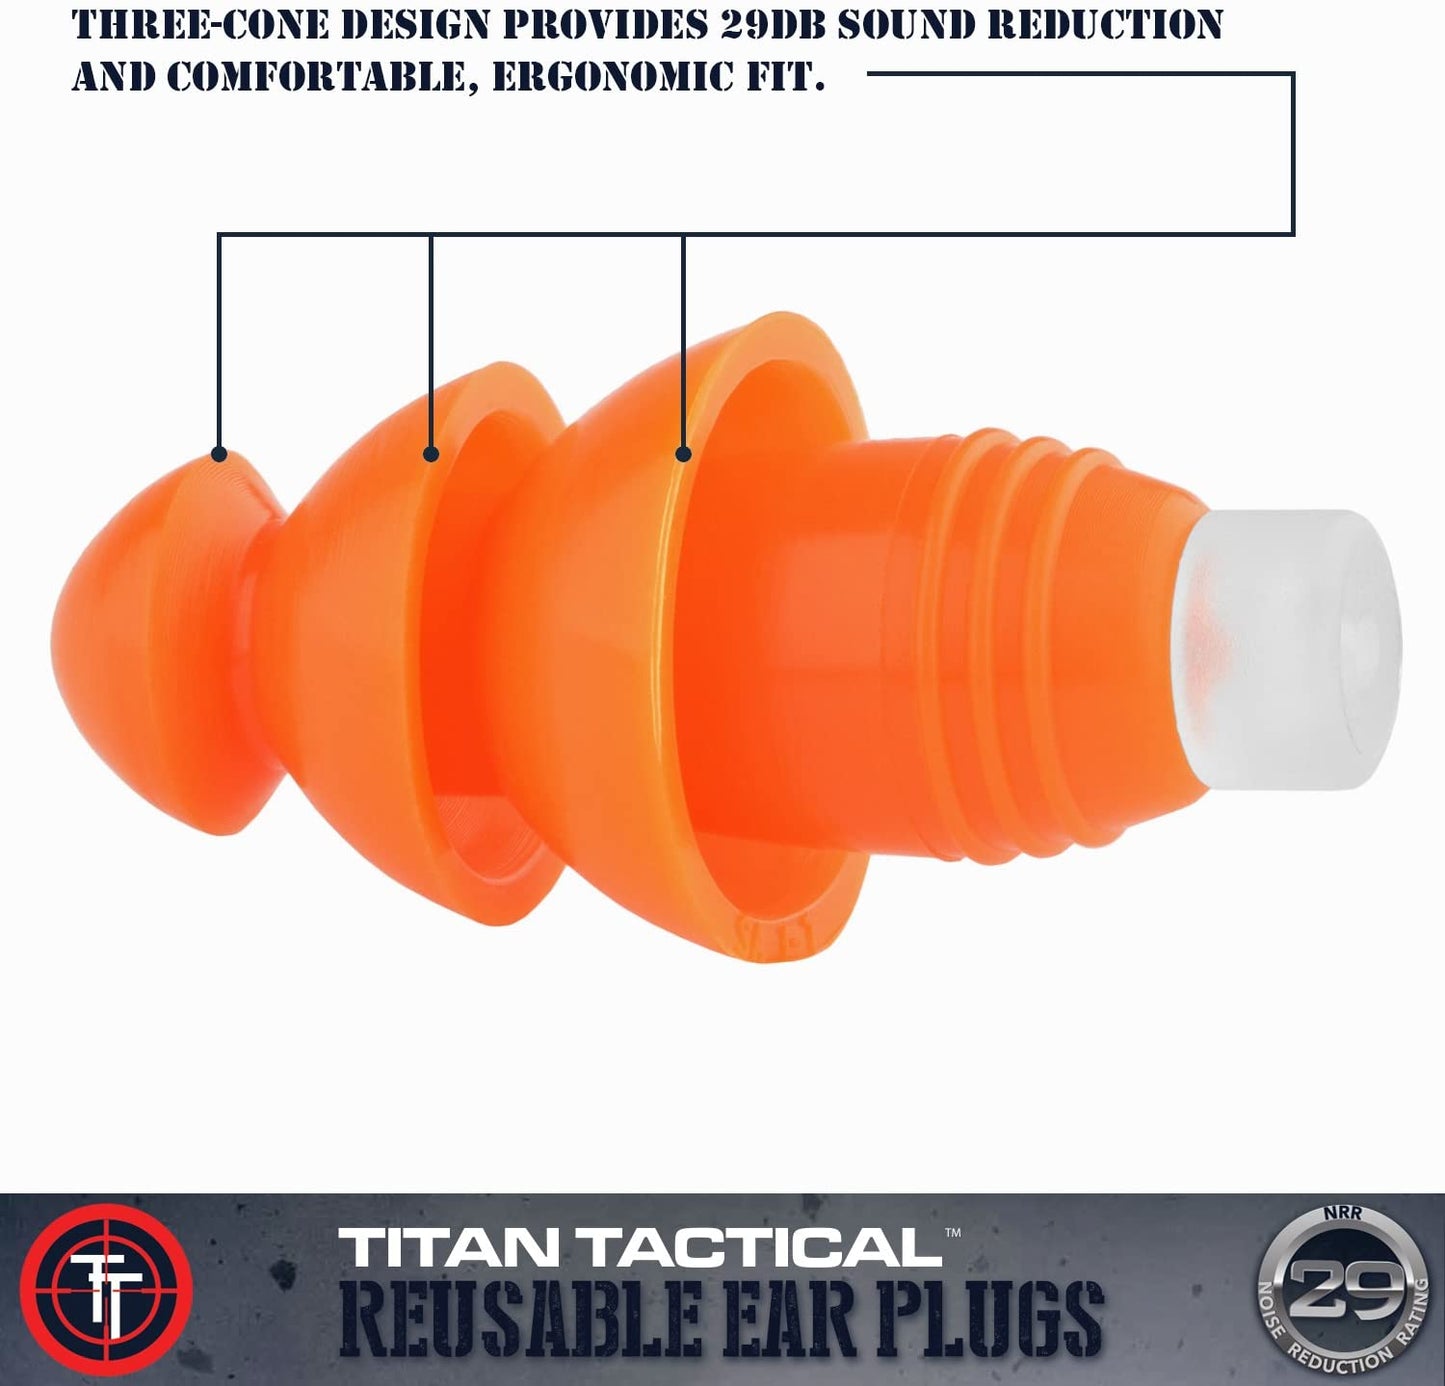 Titan Tactical 29NRR Reusable Shooting Ear Plugs w/Removable Noise Filter + Heavy Duty Aluminum Case (for Normal + Small Ear Canals) - (For 8 piece(s))